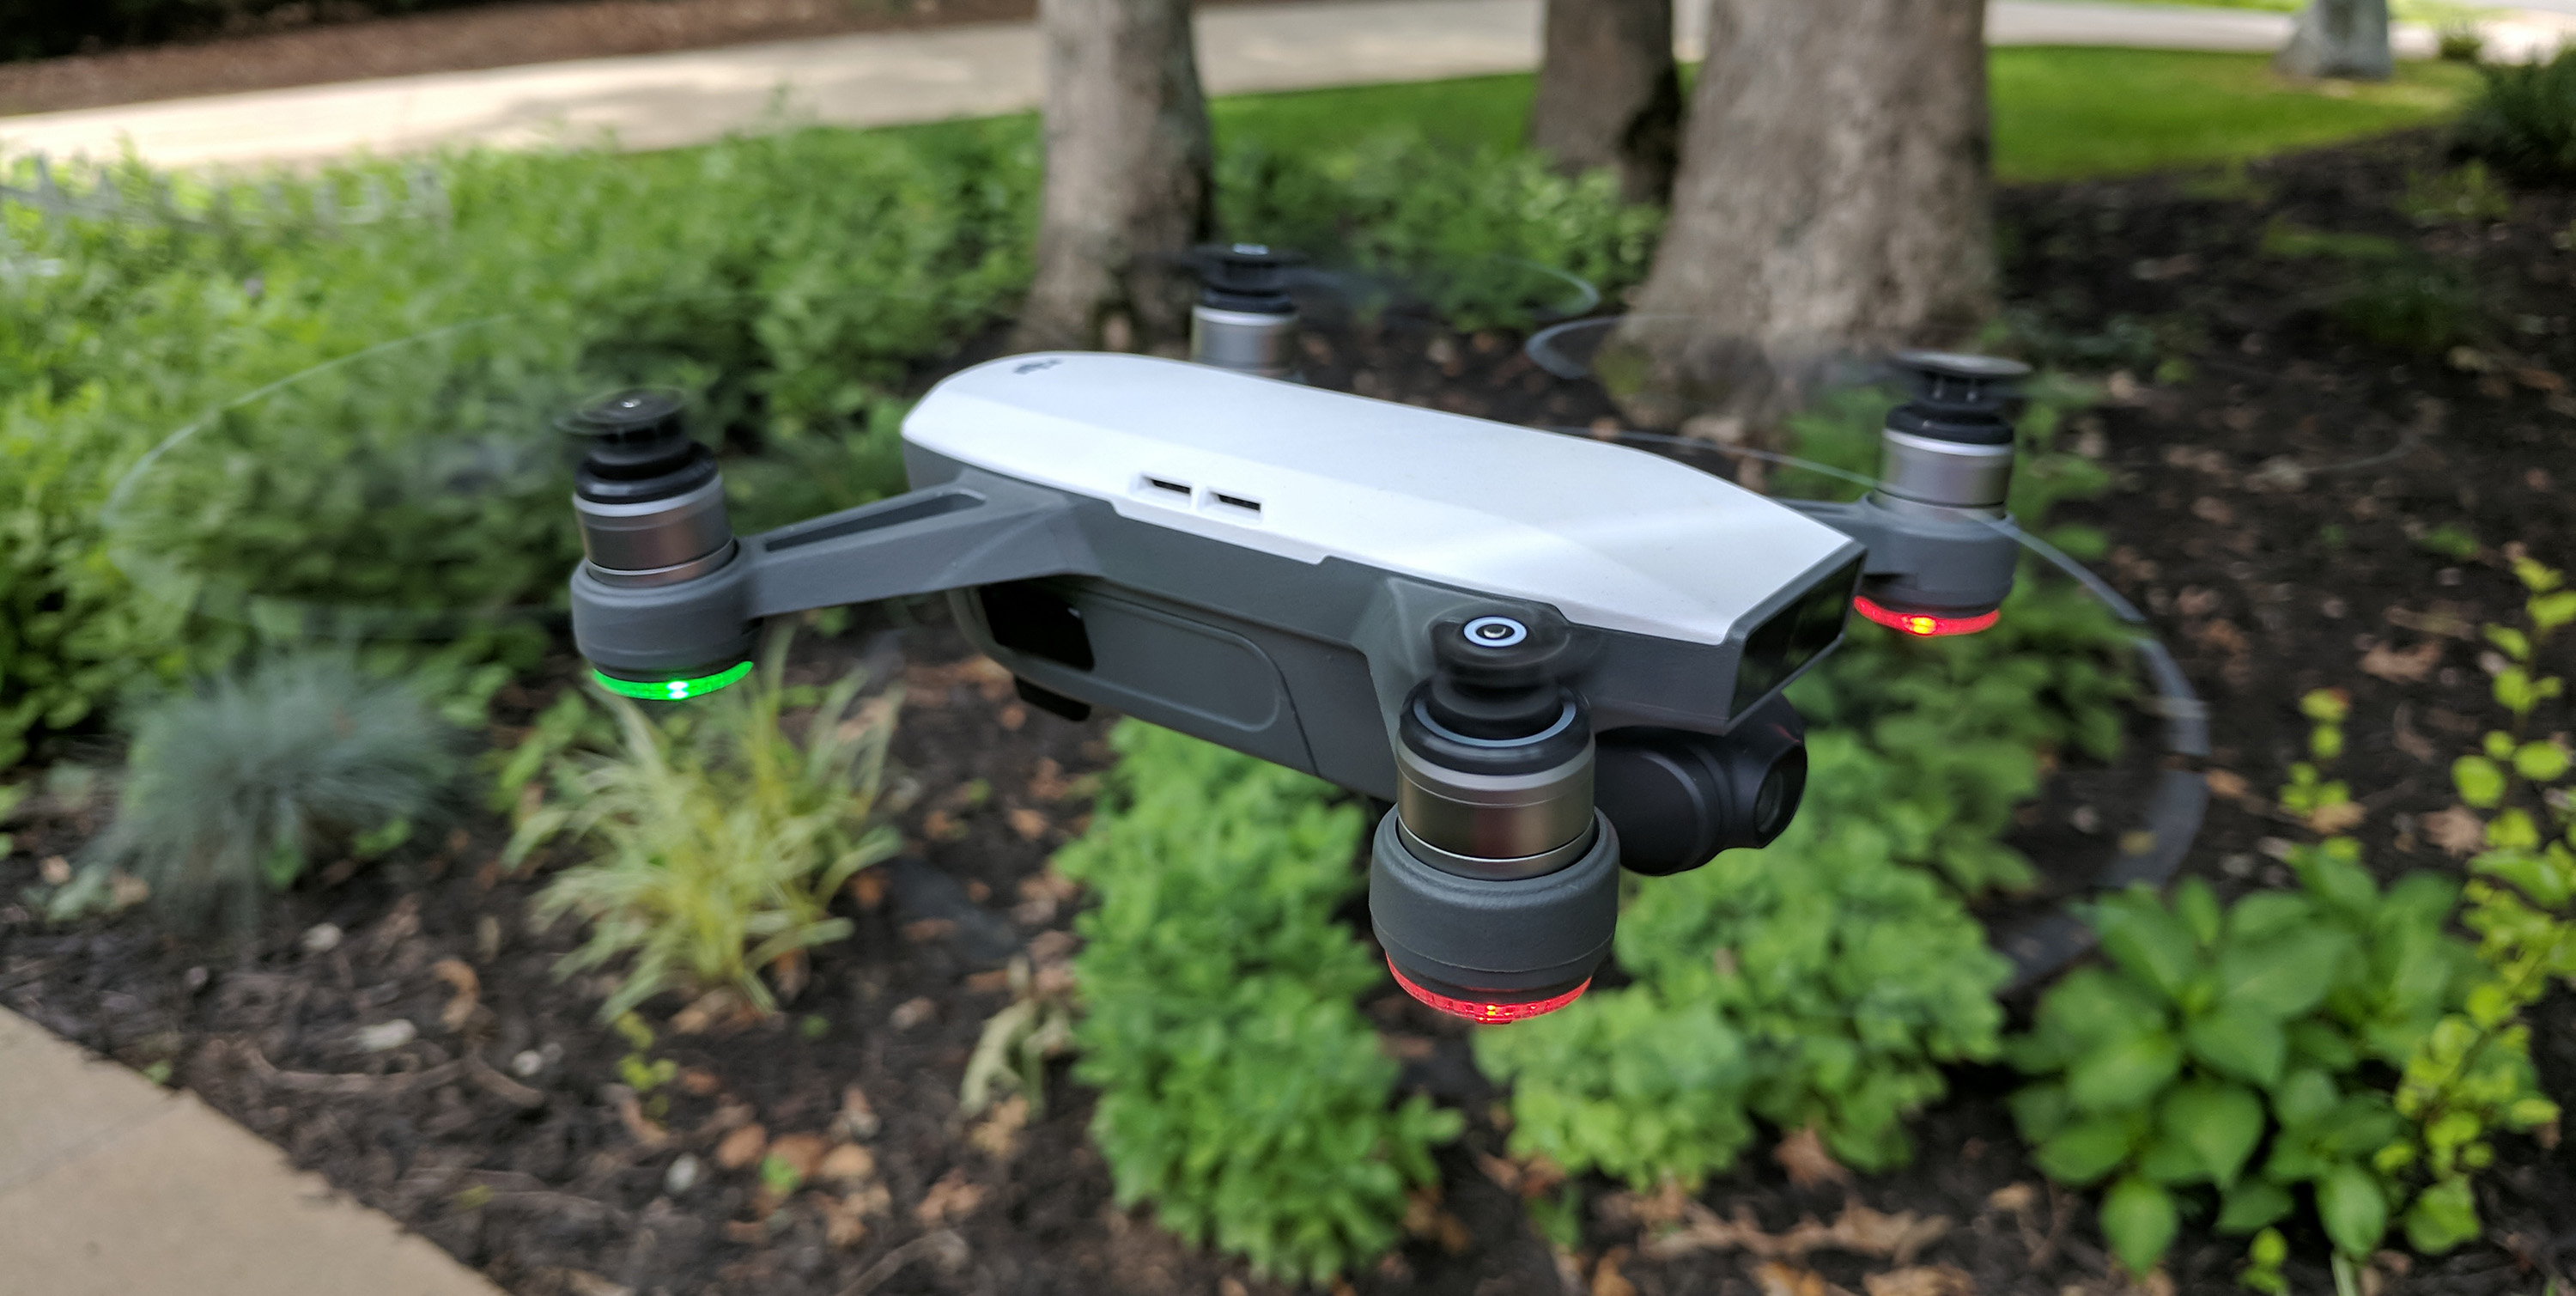 connecting DJI Spark to iPhone? Here's how to fix it - 9to5Mac